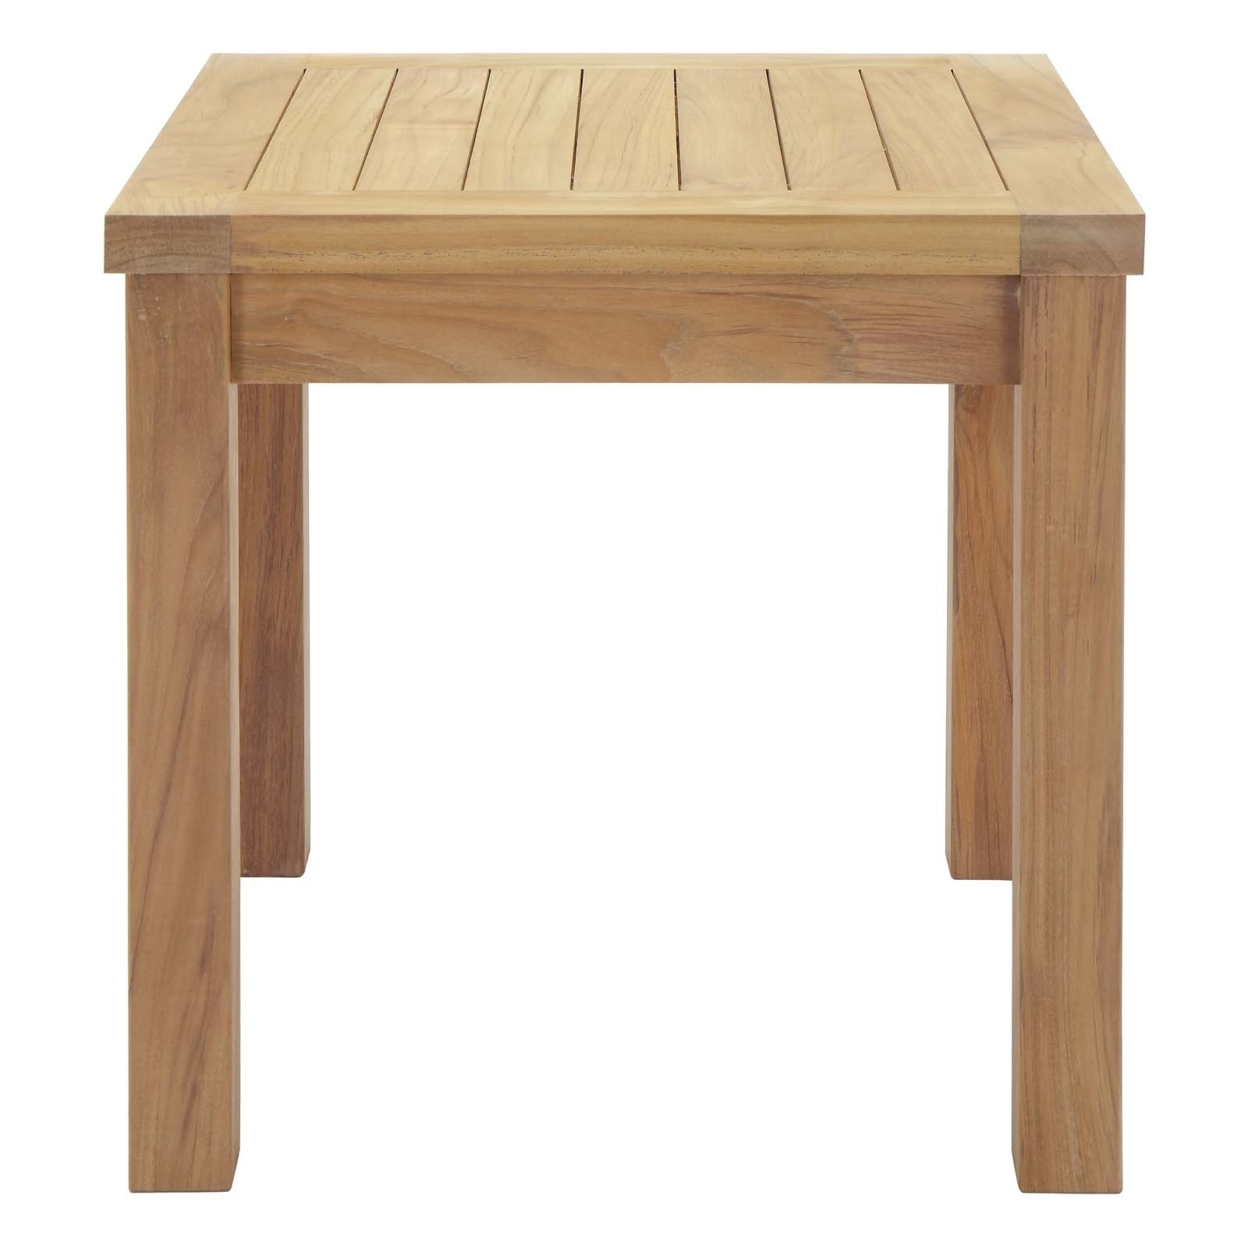 Natural Marina Outdoor Patio Teak Side Table - image 3 of 6